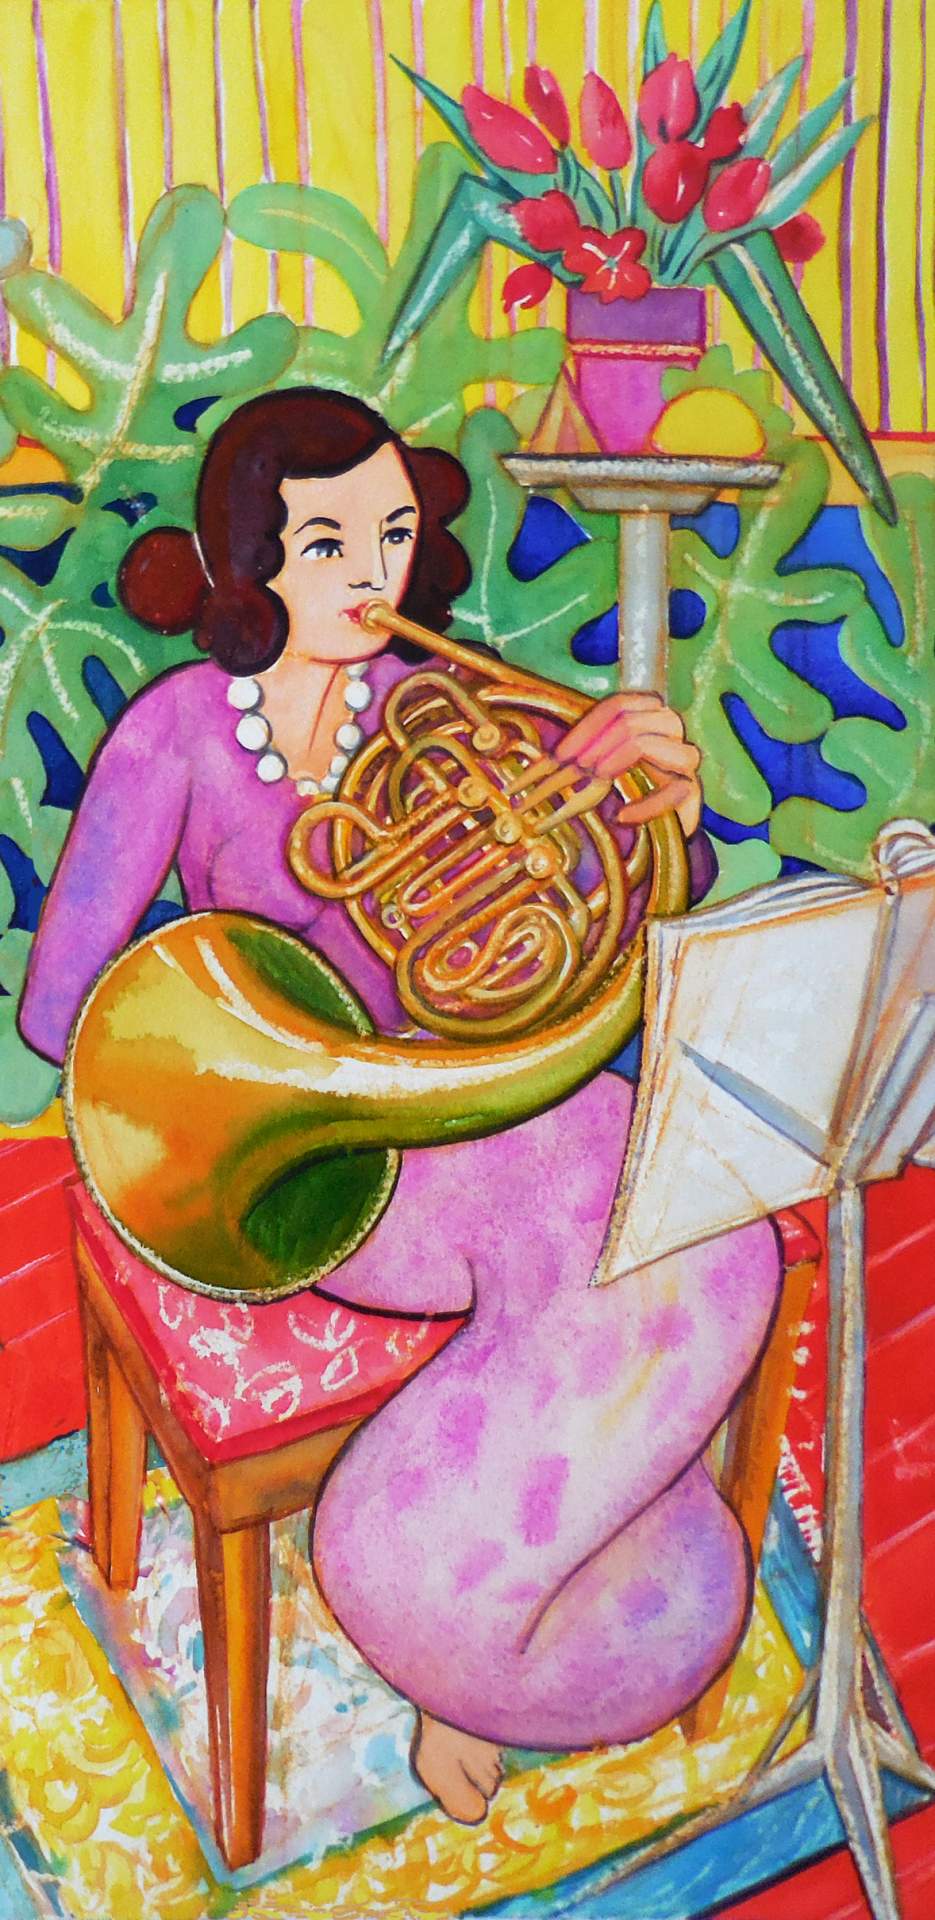 The French Horn Player